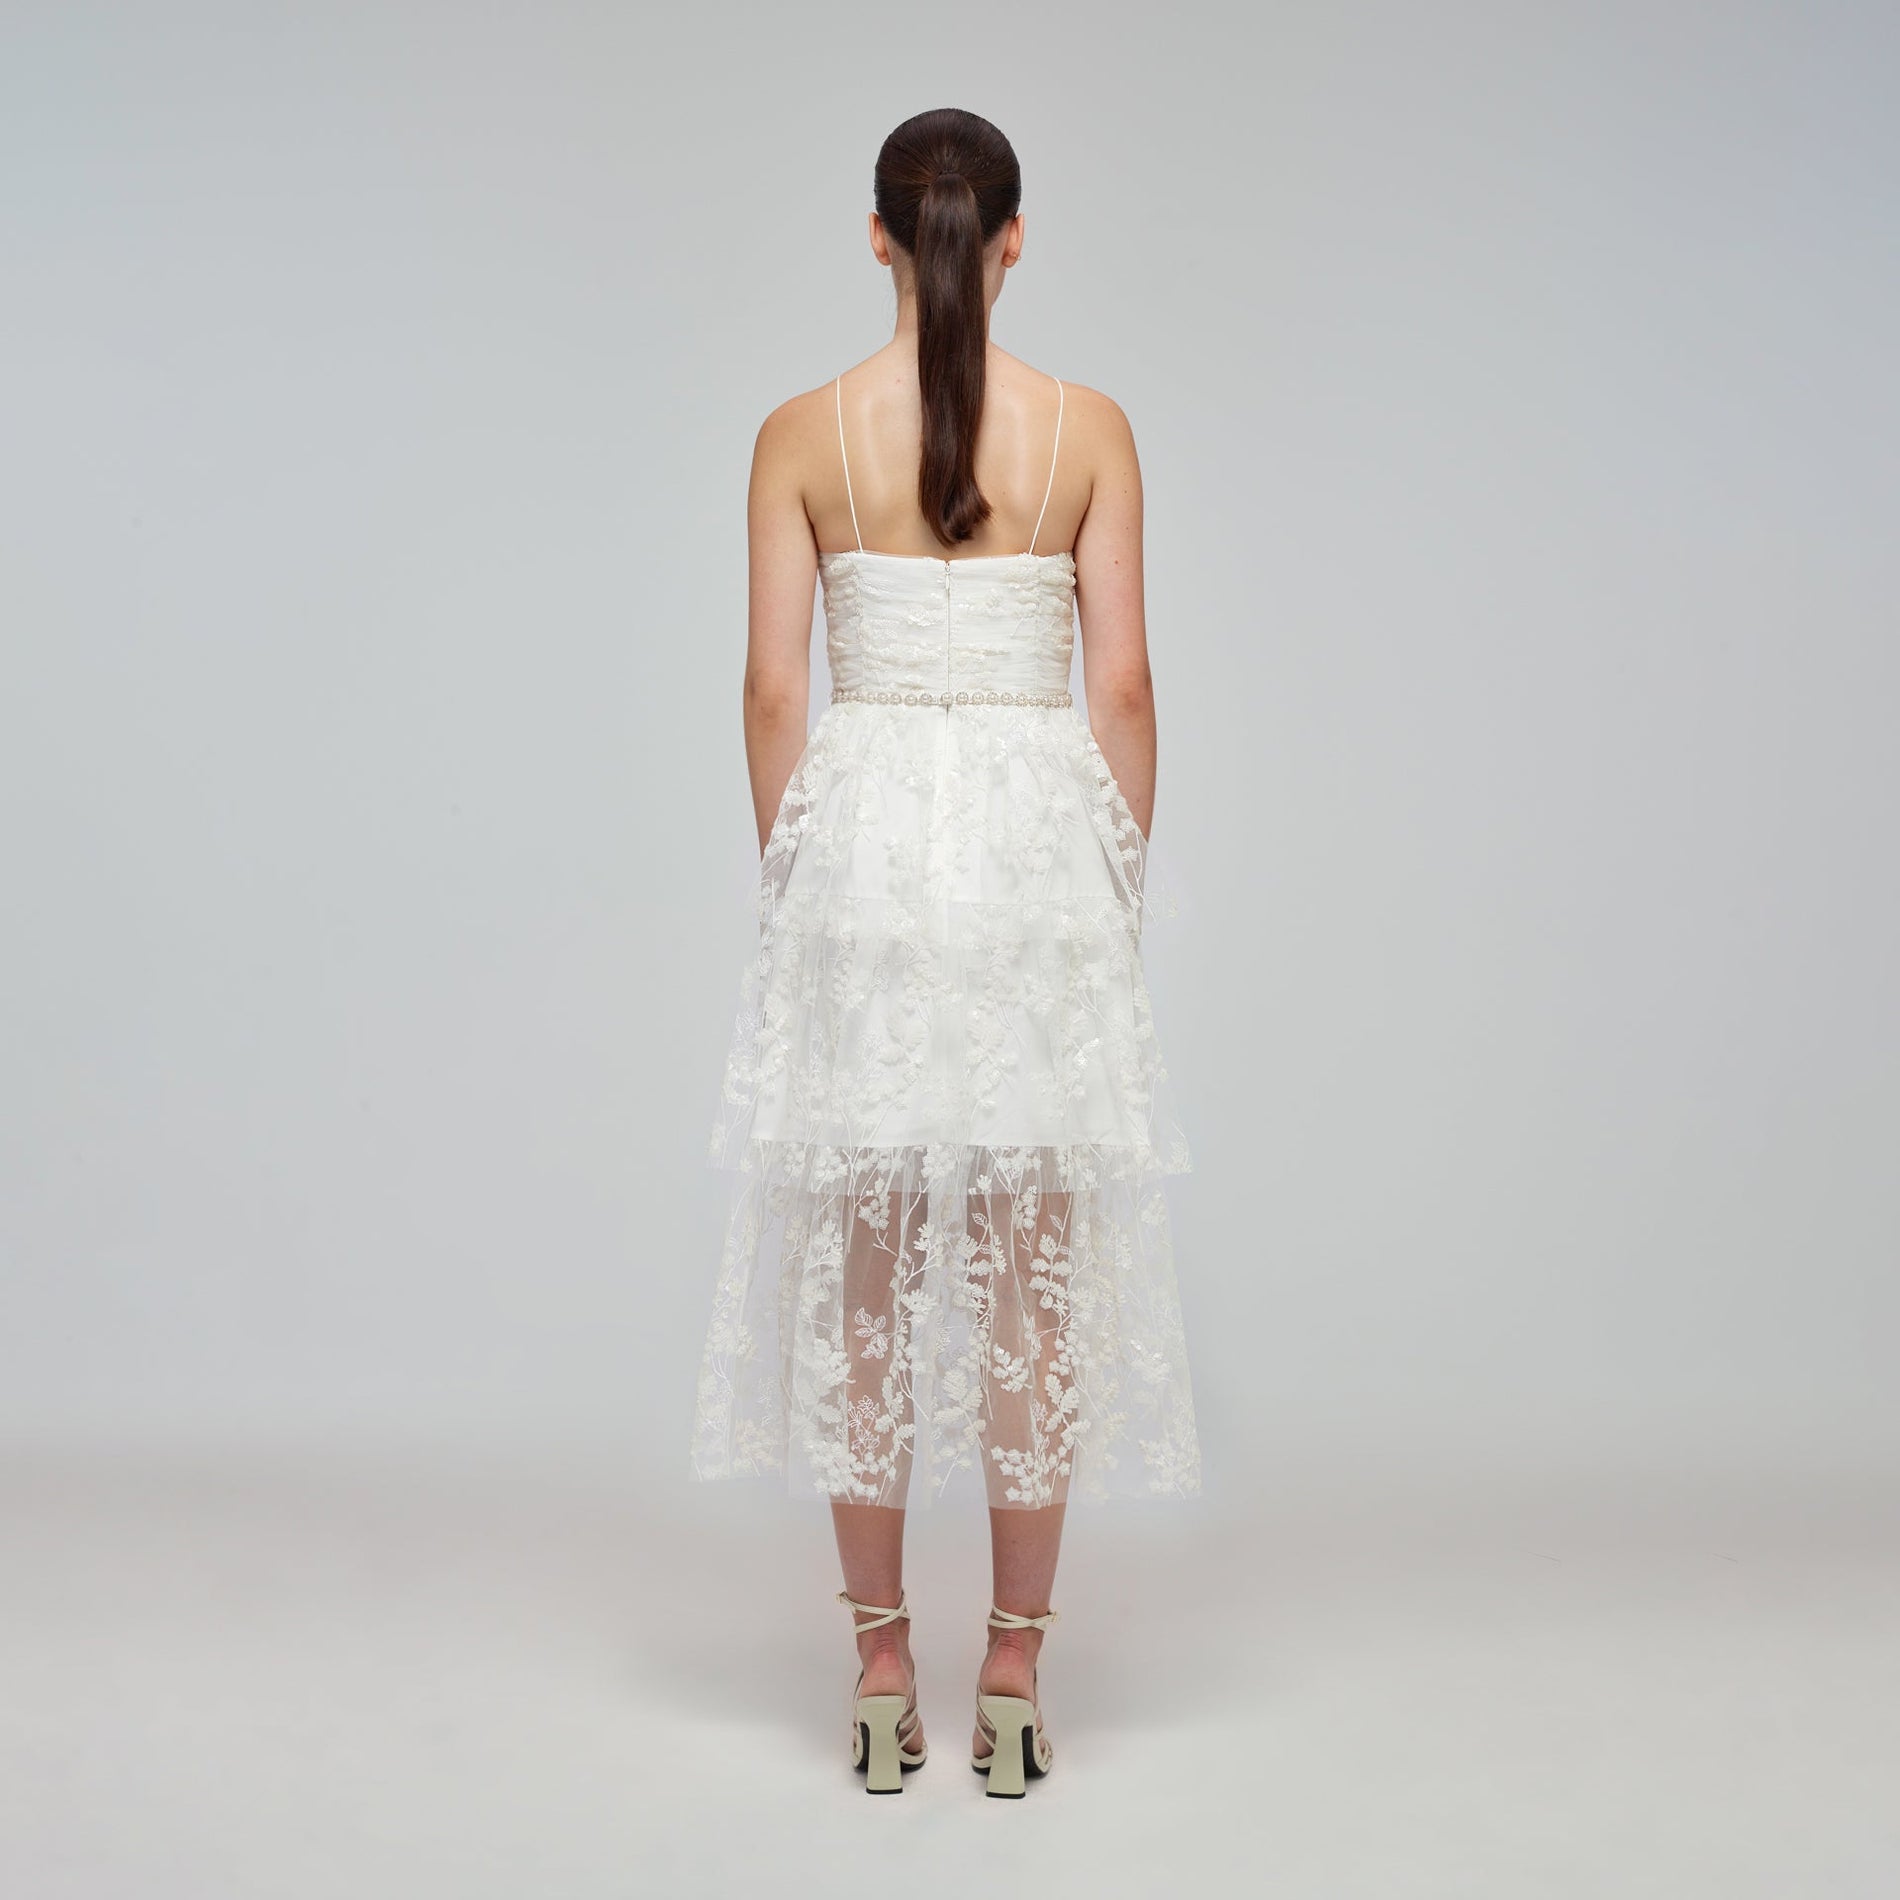 A woman wearing the Ivory Blossom Sequin Tiered Midi Dress